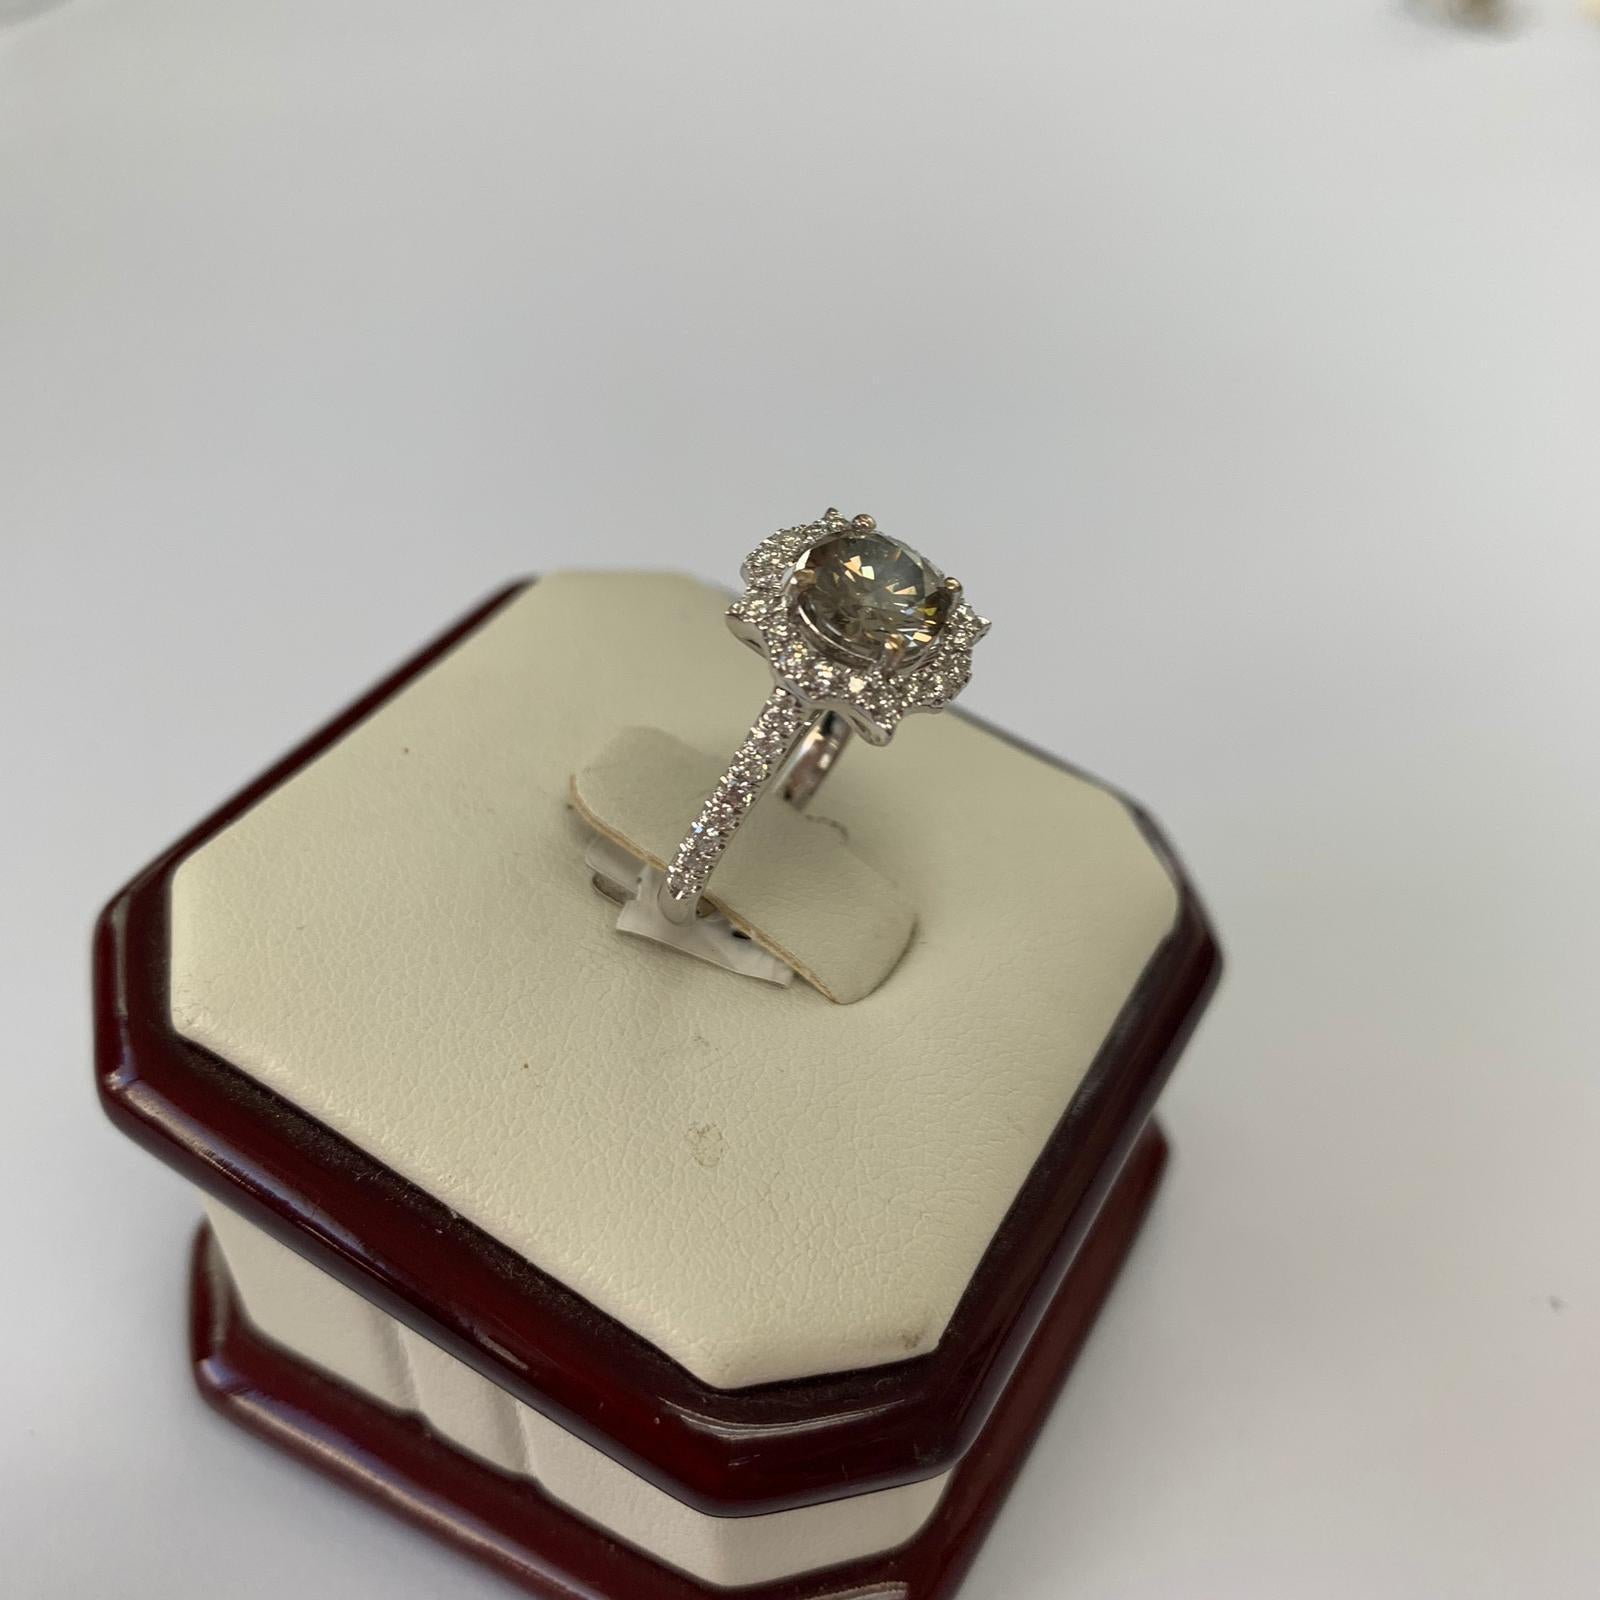 Fancy dark gray round natural diamond weighing 1.24 carats by GIA. surrounded by paved white diamonds in the halo setting. Its transparency and luster are excellent. set on 18K white gold, this ring is the ultimate gift for anniversaries, birthdays,